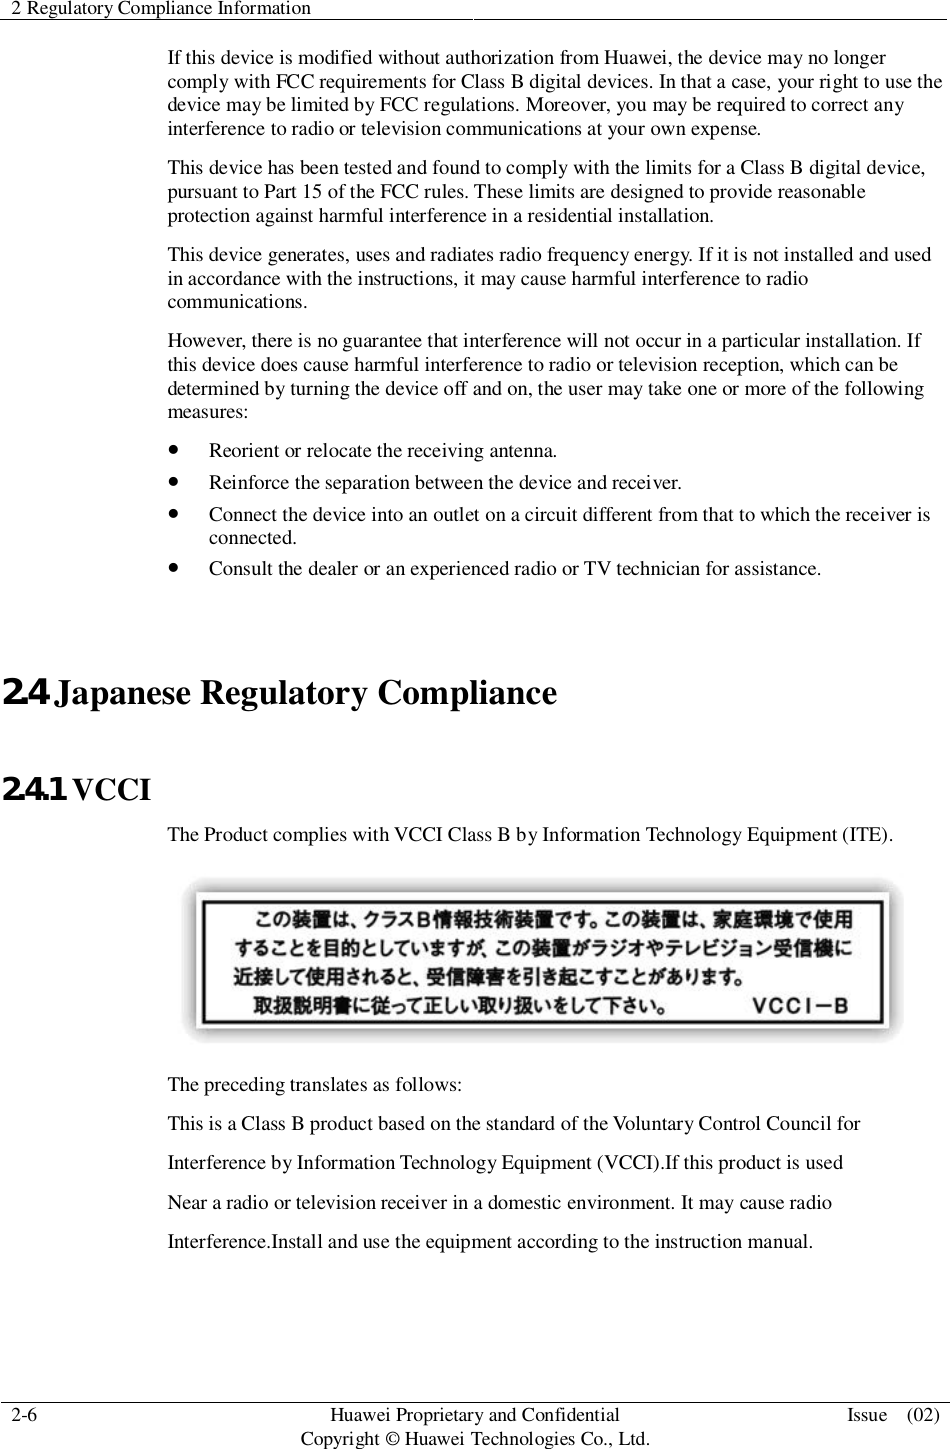 2 Regulatory Compliance Information2-6 HuaweiProprietary and ConfidentialCopyright © Huawei Technologies Co., Ltd. Issue  (02)If this device is modified without authorization from Huawei, the device may no longercomply with FCC requirements for Class B digital devices. In that a case, your right to use thedevice may be limited by FCC regulations. Moreover, you may be required to correct anyinterference to radio or television communications at your own expense.This device has been tested and found to comply with the limits for a Class B digital device,pursuant to Part 15 of the FCC rules. These limits are designed to provide reasonableprotection against harmful interference in a residential installation.This device generates, uses and radiates radio frequency energy. If it is not installed and usedin accordance with the instructions, it may cause harmful interference to radiocommunications.However, there is no guarantee that interference will not occur in a particular installation. Ifthis device does cause harmful interference to radio or television reception, which can bedetermined by turning the device off and on, the user may take one or more of the followingmeasures:Reorient or relocate the receiving antenna.Reinforce the separation between the device and receiver.Connect the device into an outlet on a circuit different from that to which the receiver isconnected.Consult the dealer or an experienced radio or TV technician for assistance.2.4 Japanese Regulatory Compliance2.4.1 VCCIThe Product complies with VCCI Class B by Information Technology Equipment (ITE).The preceding translates as follows:This is a Class B product based on the standard of the Voluntary Control Council forInterference by Information Technology Equipment (VCCI).If this product is usedNear a radio or television receiver in a domestic environment. It may cause radioInterference.Install and use the equipment according to the instruction manual.